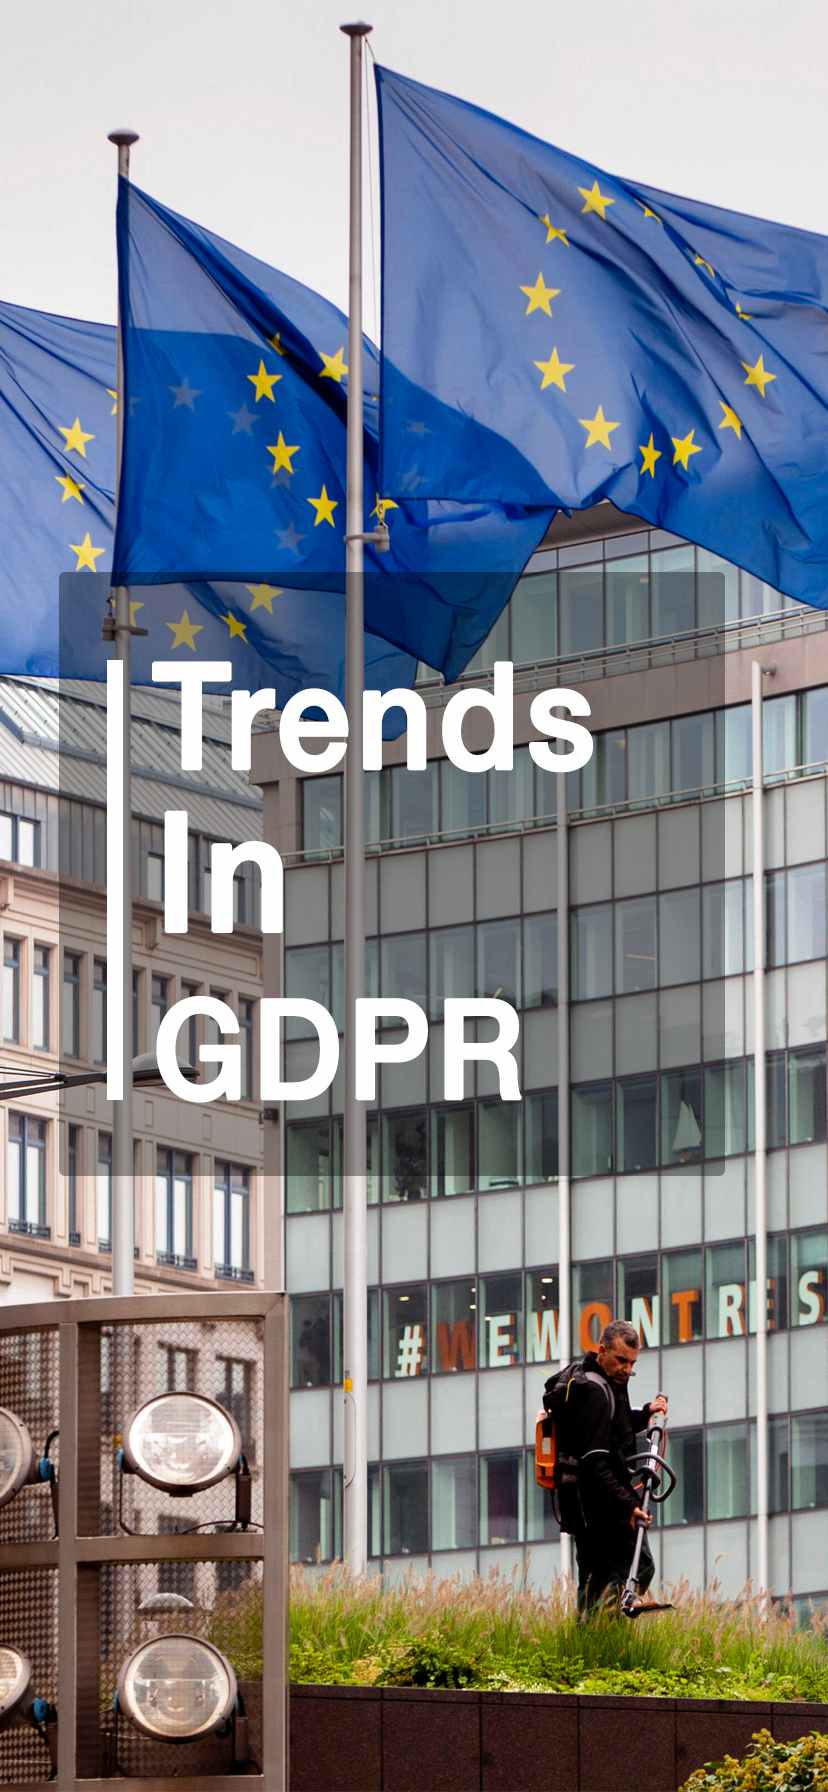 Cover Image for an article entitled Trends in GDPR by Paul Rogers - Data Privacy Consultant - Data-Privacy.ie